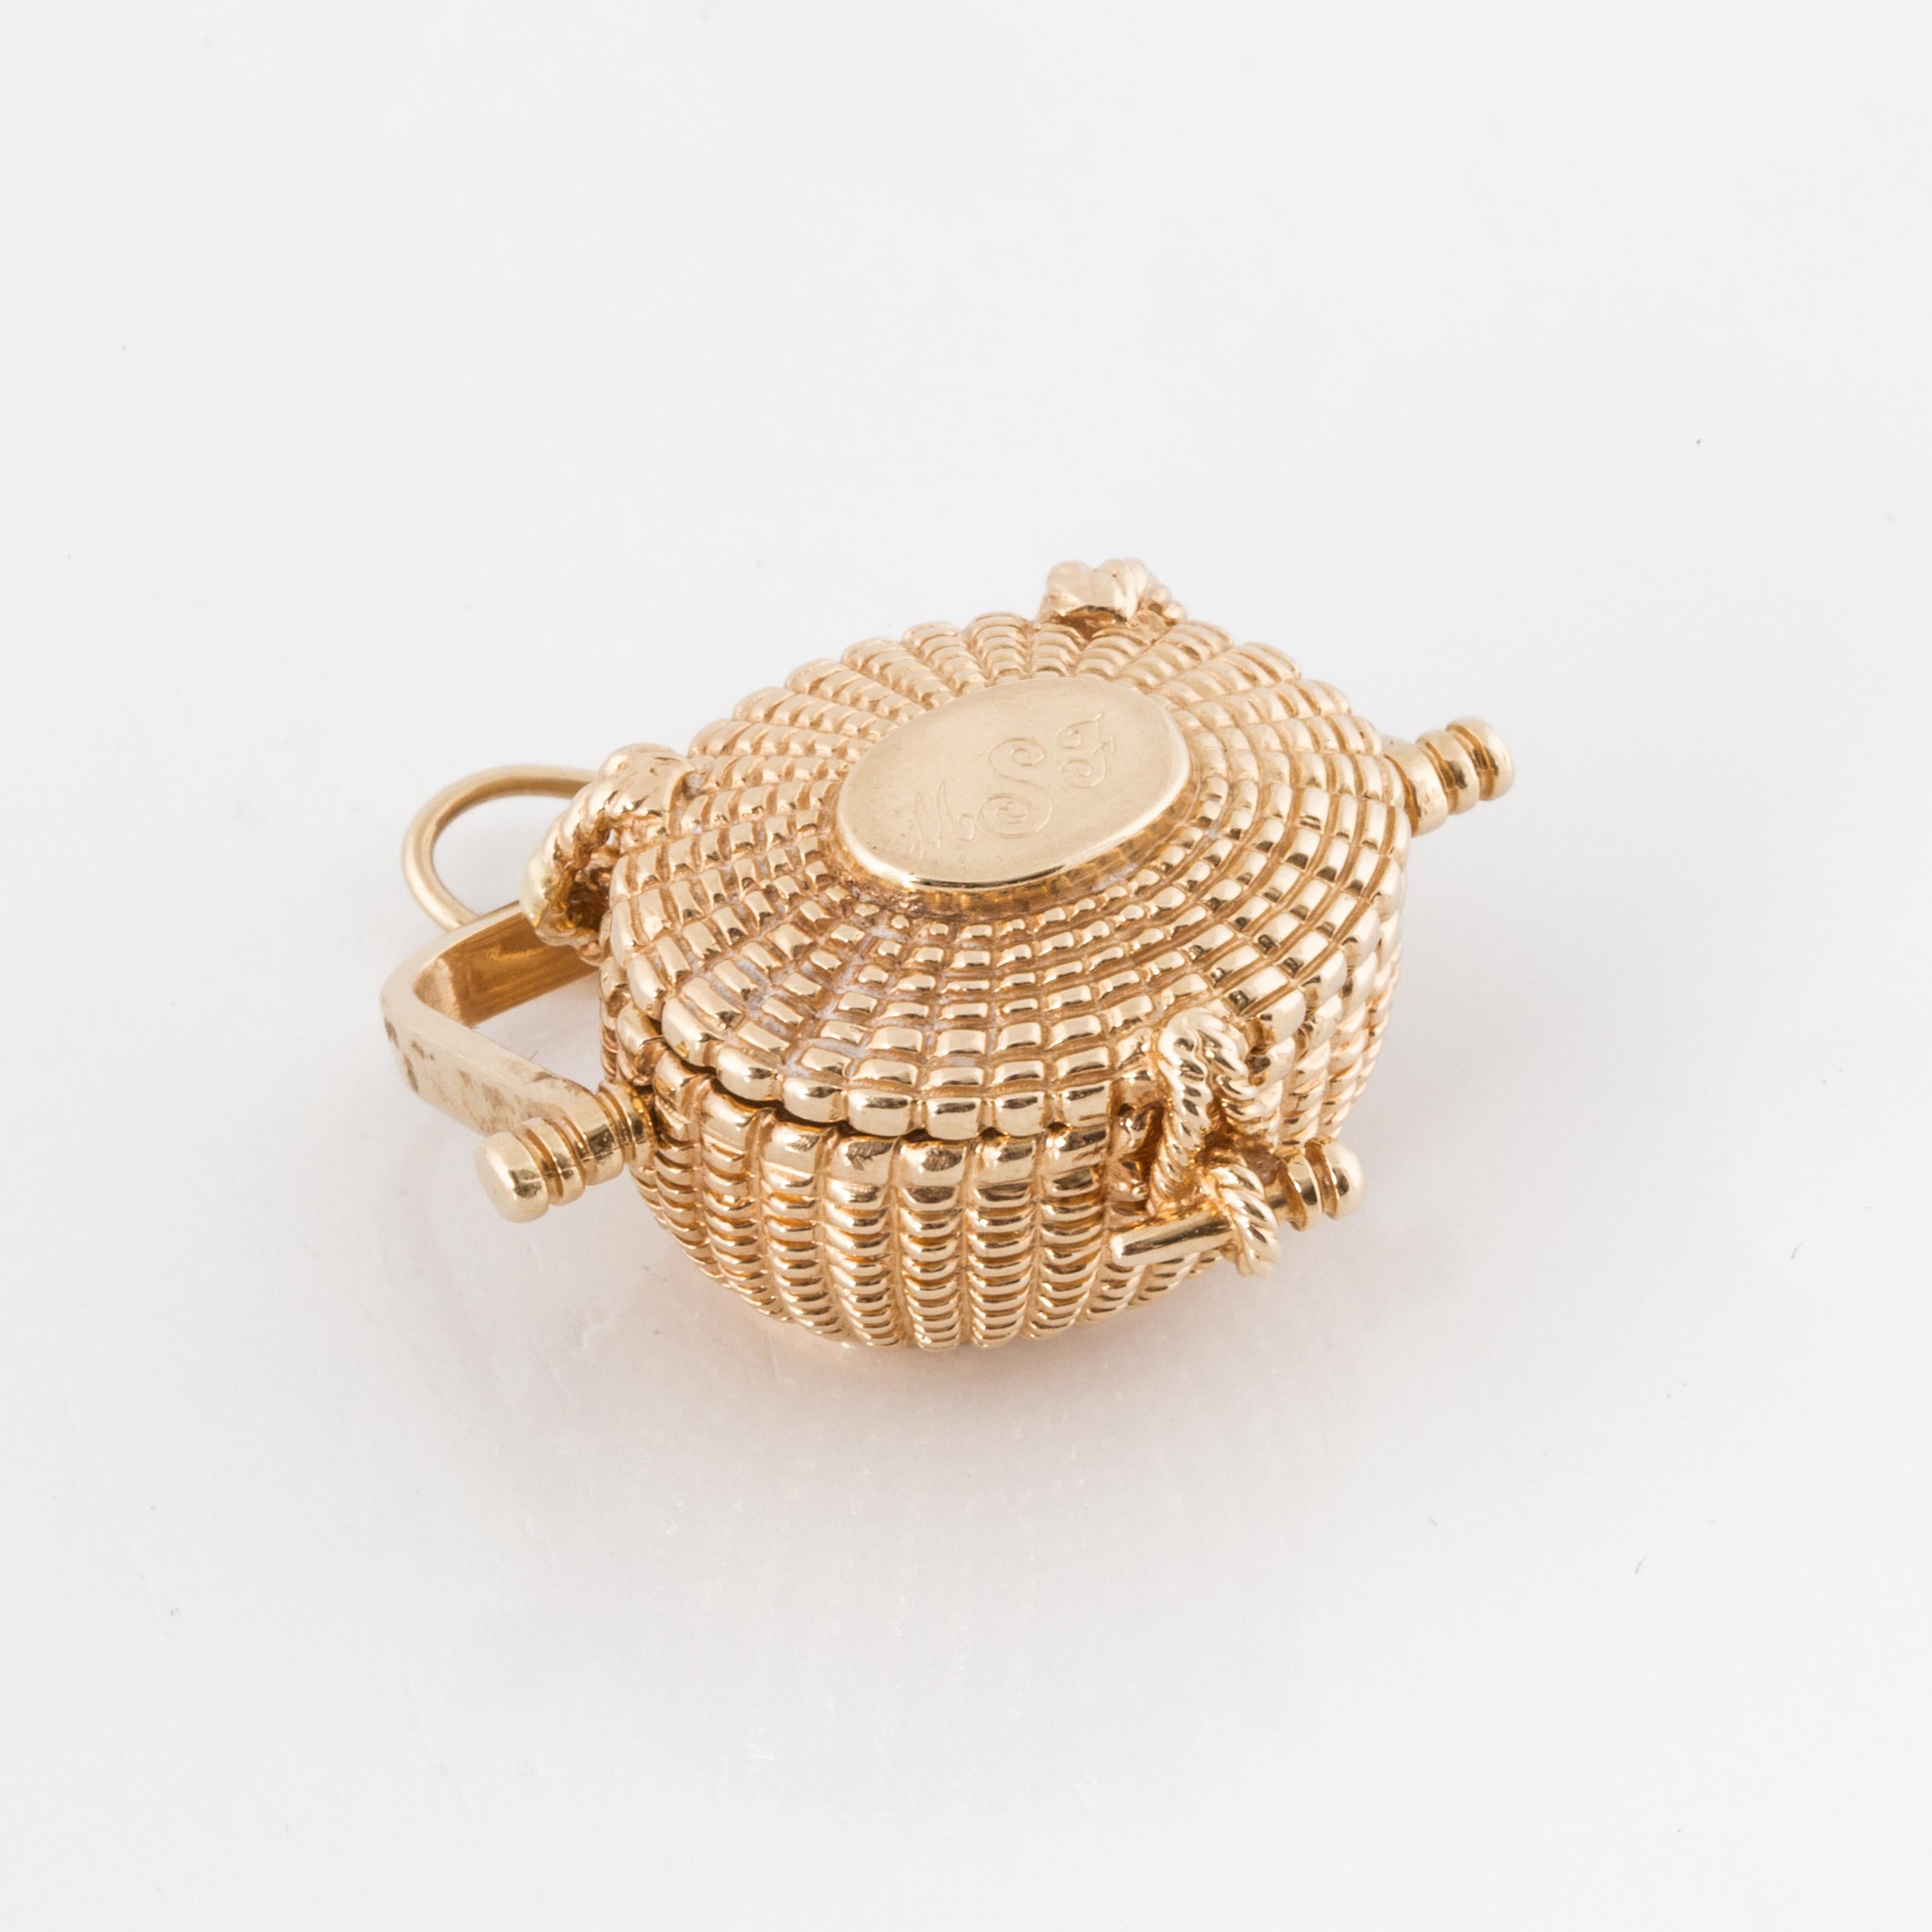 14K yellow gold Nantucket basket charm or pendant.  Opens to reveal a miniature penny still inside.  Dated 1977 with other engraving.  Measures 1-1/8